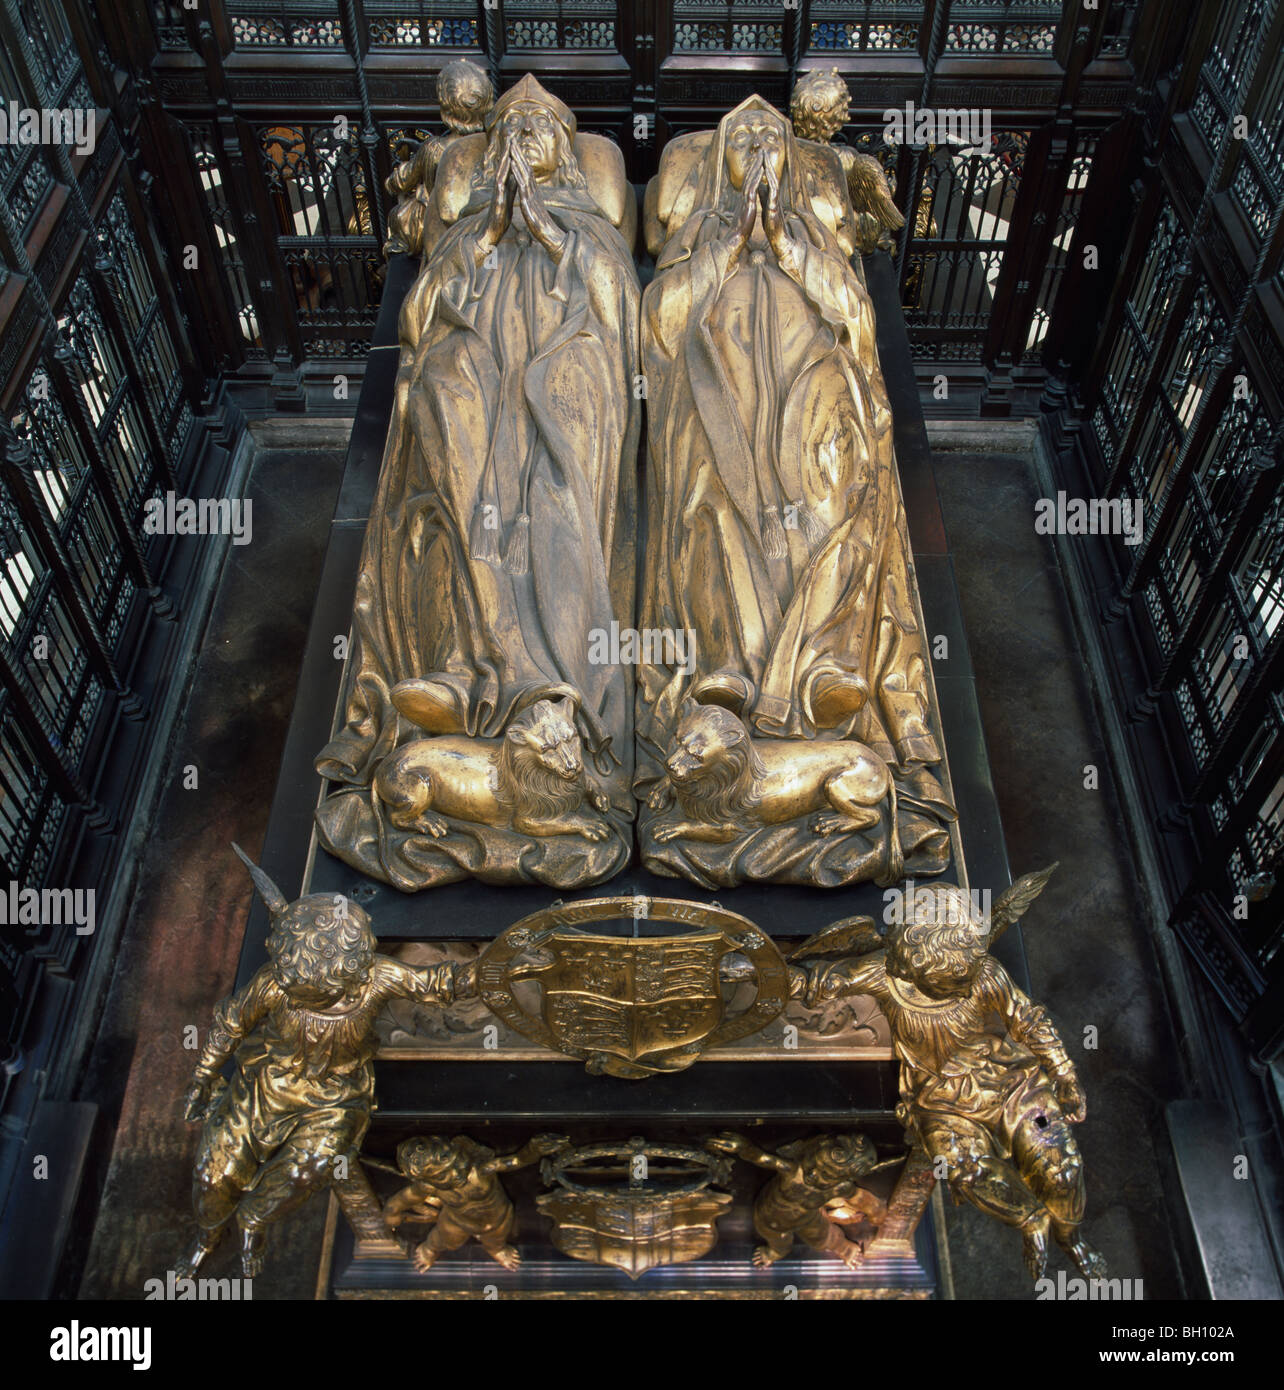 Henry Vii Chapel Westminster Abbey High Resolution Stock Photography and Images - Alamy